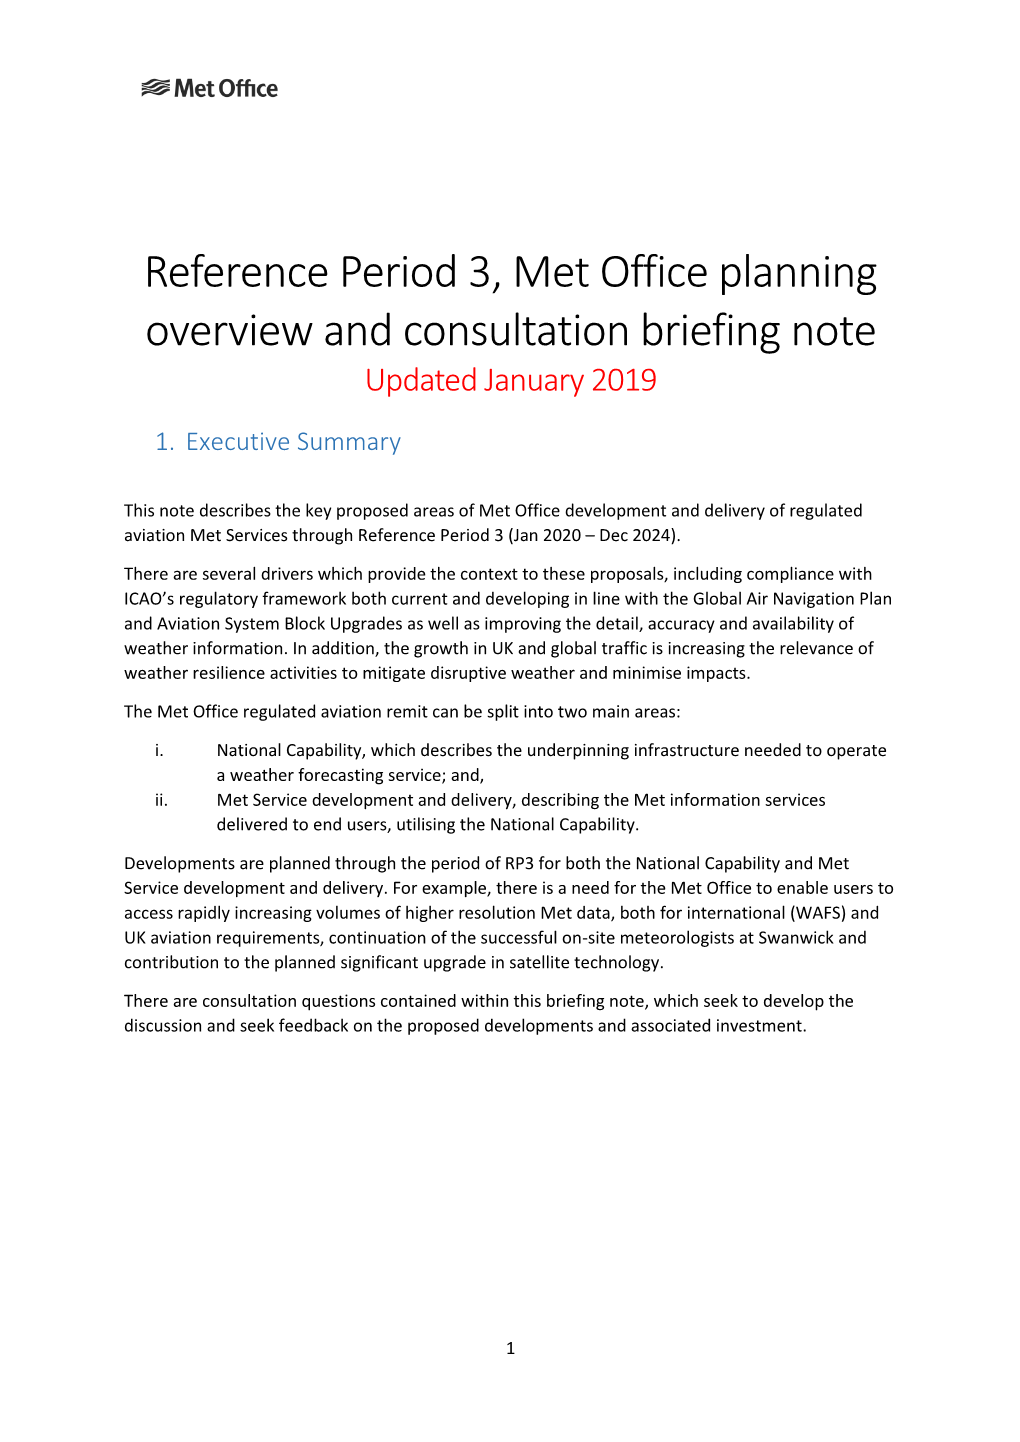 Reference Period 3, Met Office Planning Overview and Consultation Briefing Note Updated January 2019